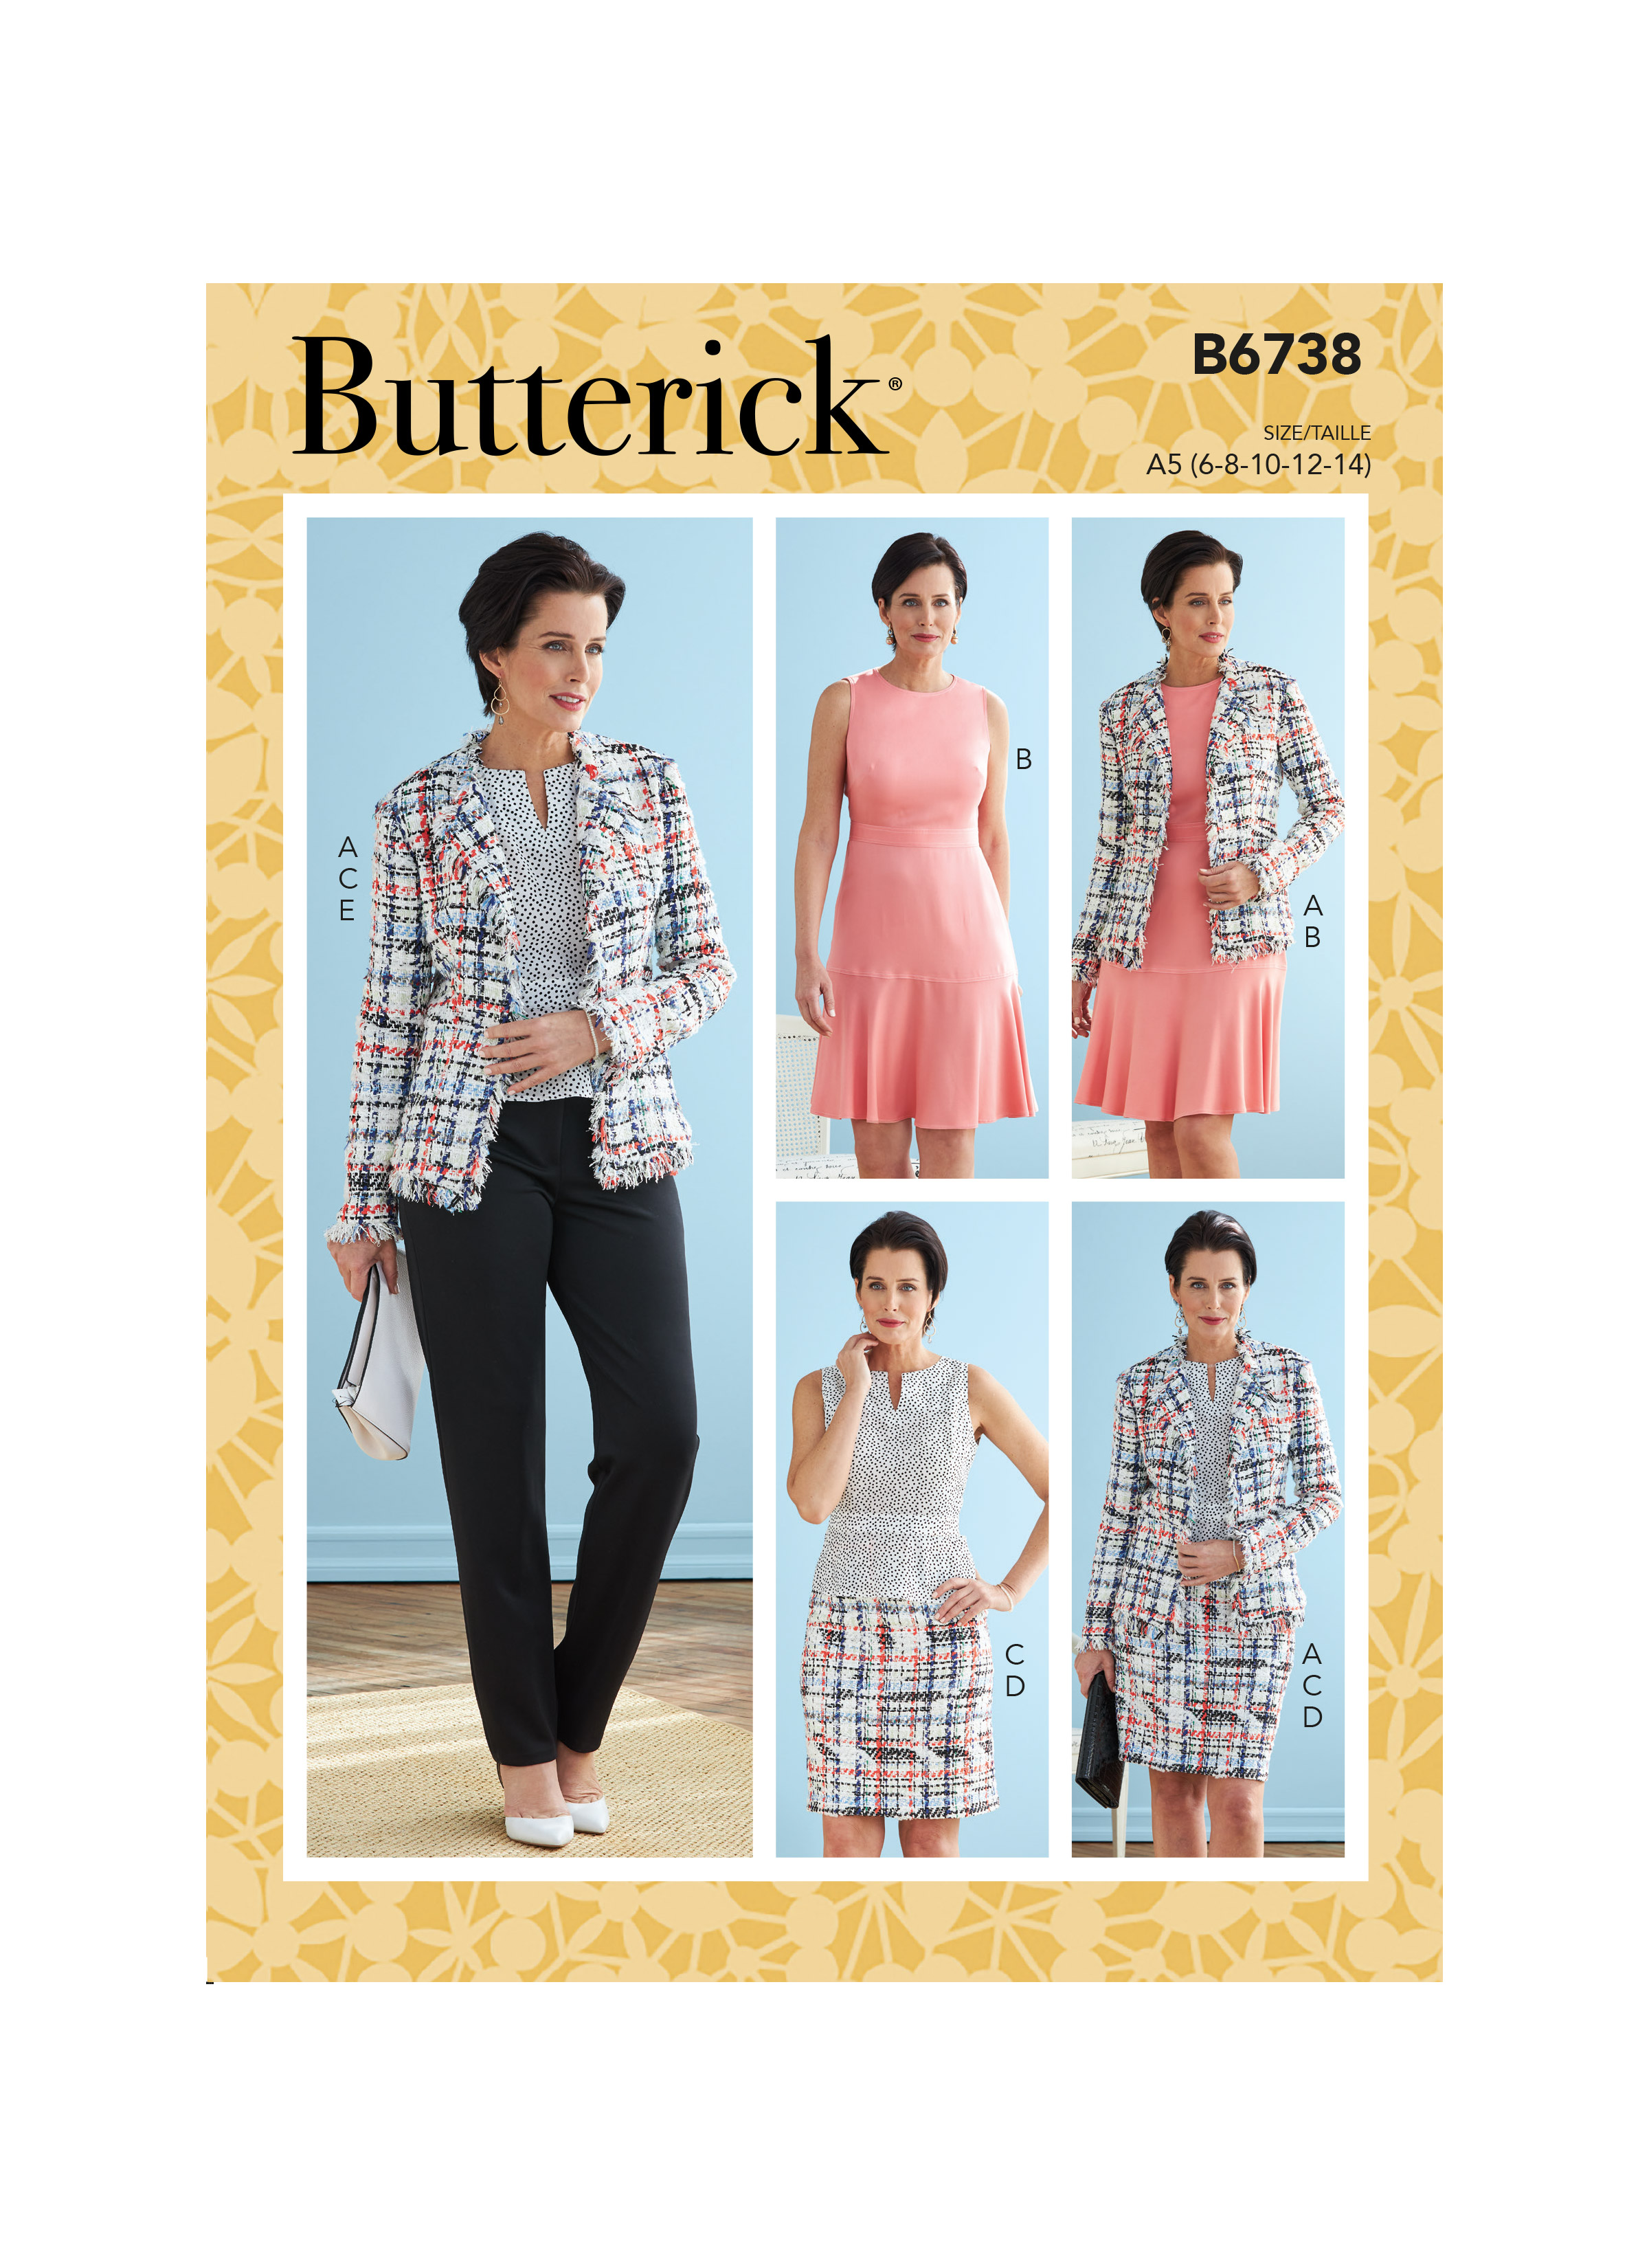 Butterick 6268 UNCUT Skirt and Pants Pattern Wardrobe Size 20-22-24 Misses'/Misses' Petite Jacket Fast and Easy Pattern Duster